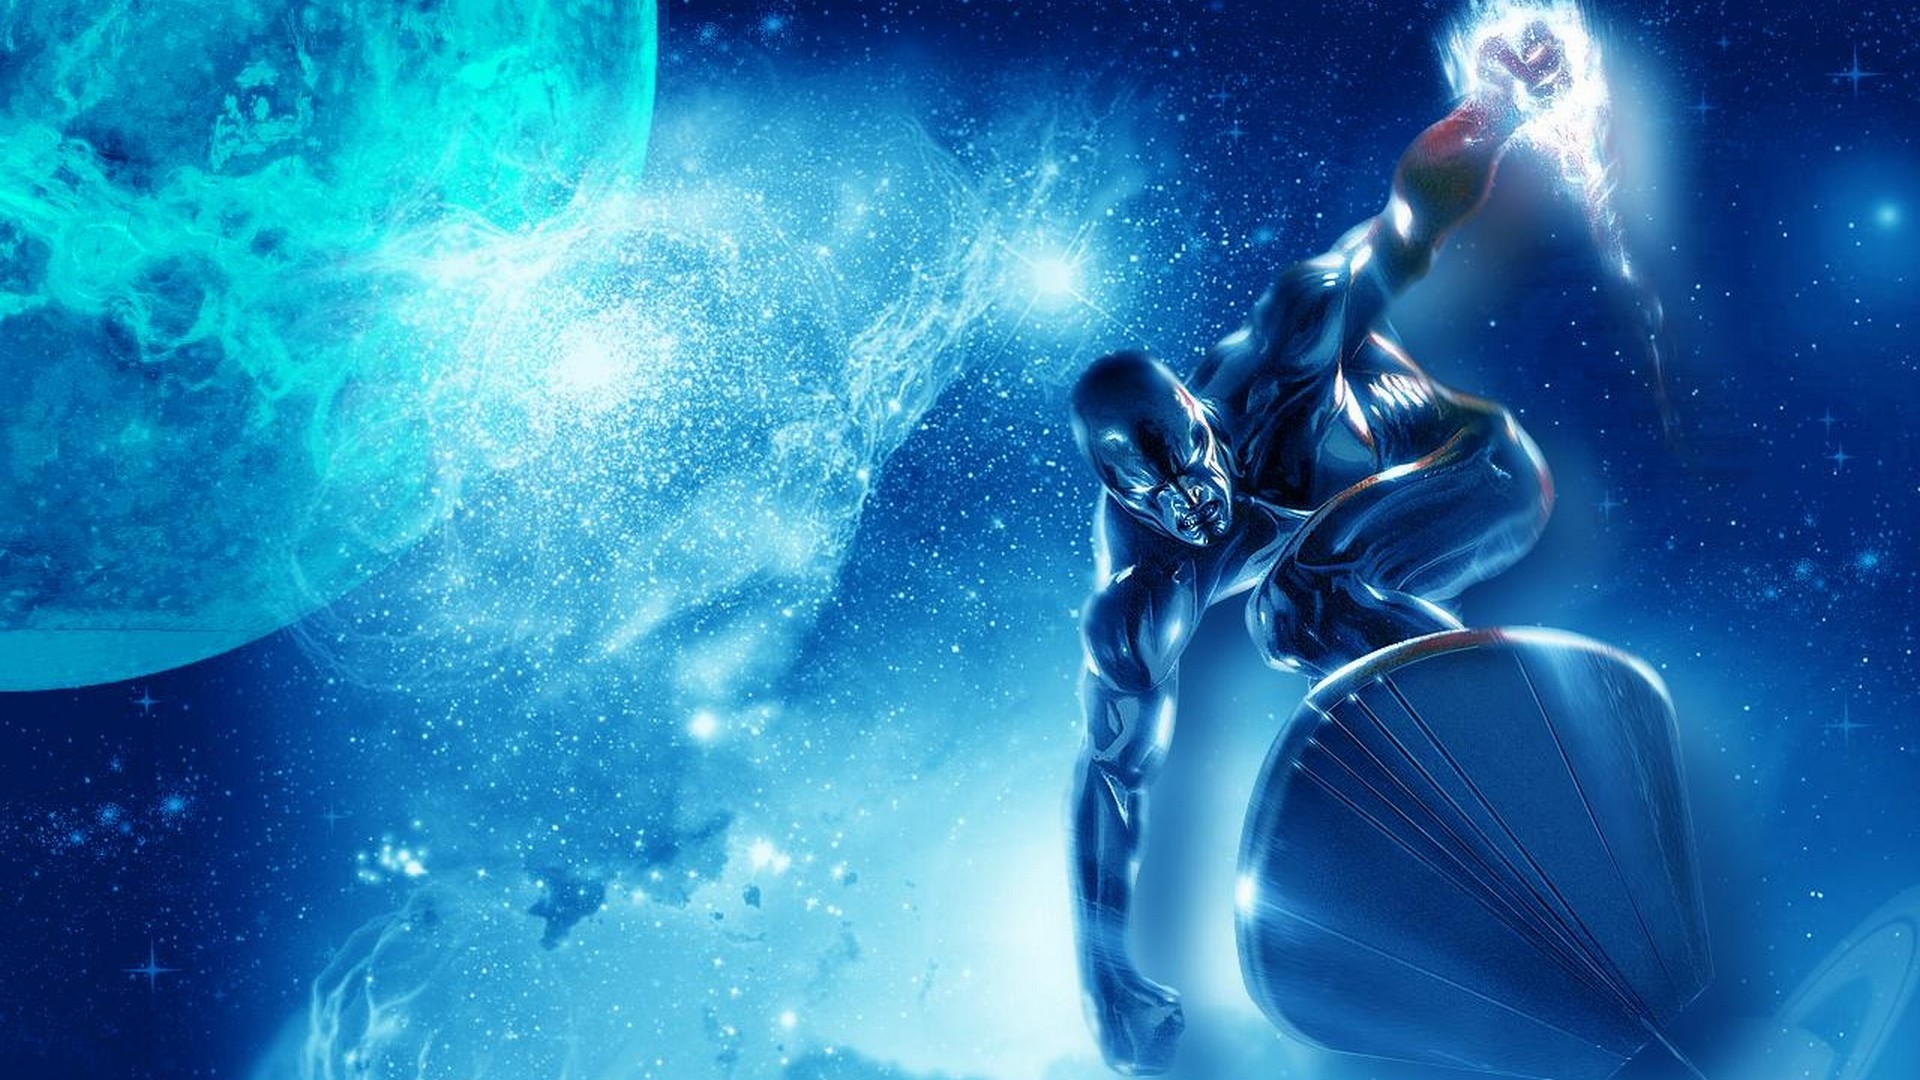 1920x1080 70 Silver Surfer HD Wallpapers | Backgrounds - Wallpaper Abyss